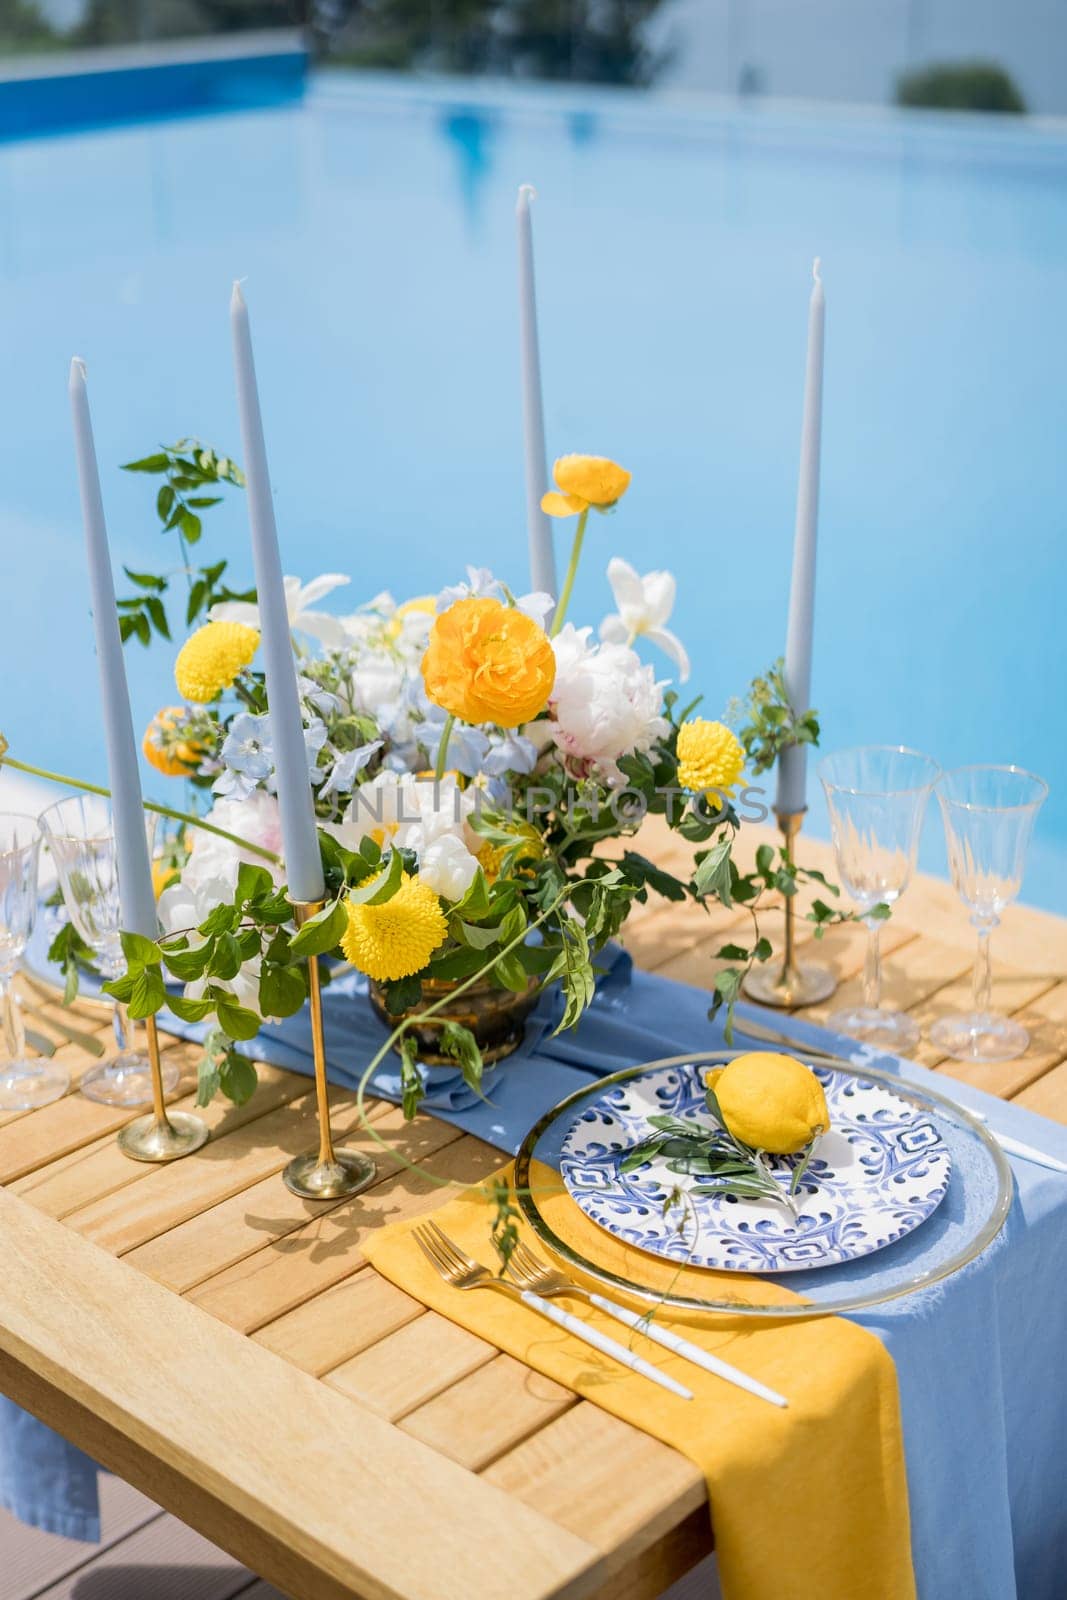 Lemon lies on a plate near a bouquet of flowers on a festive table by the pool. High quality photo